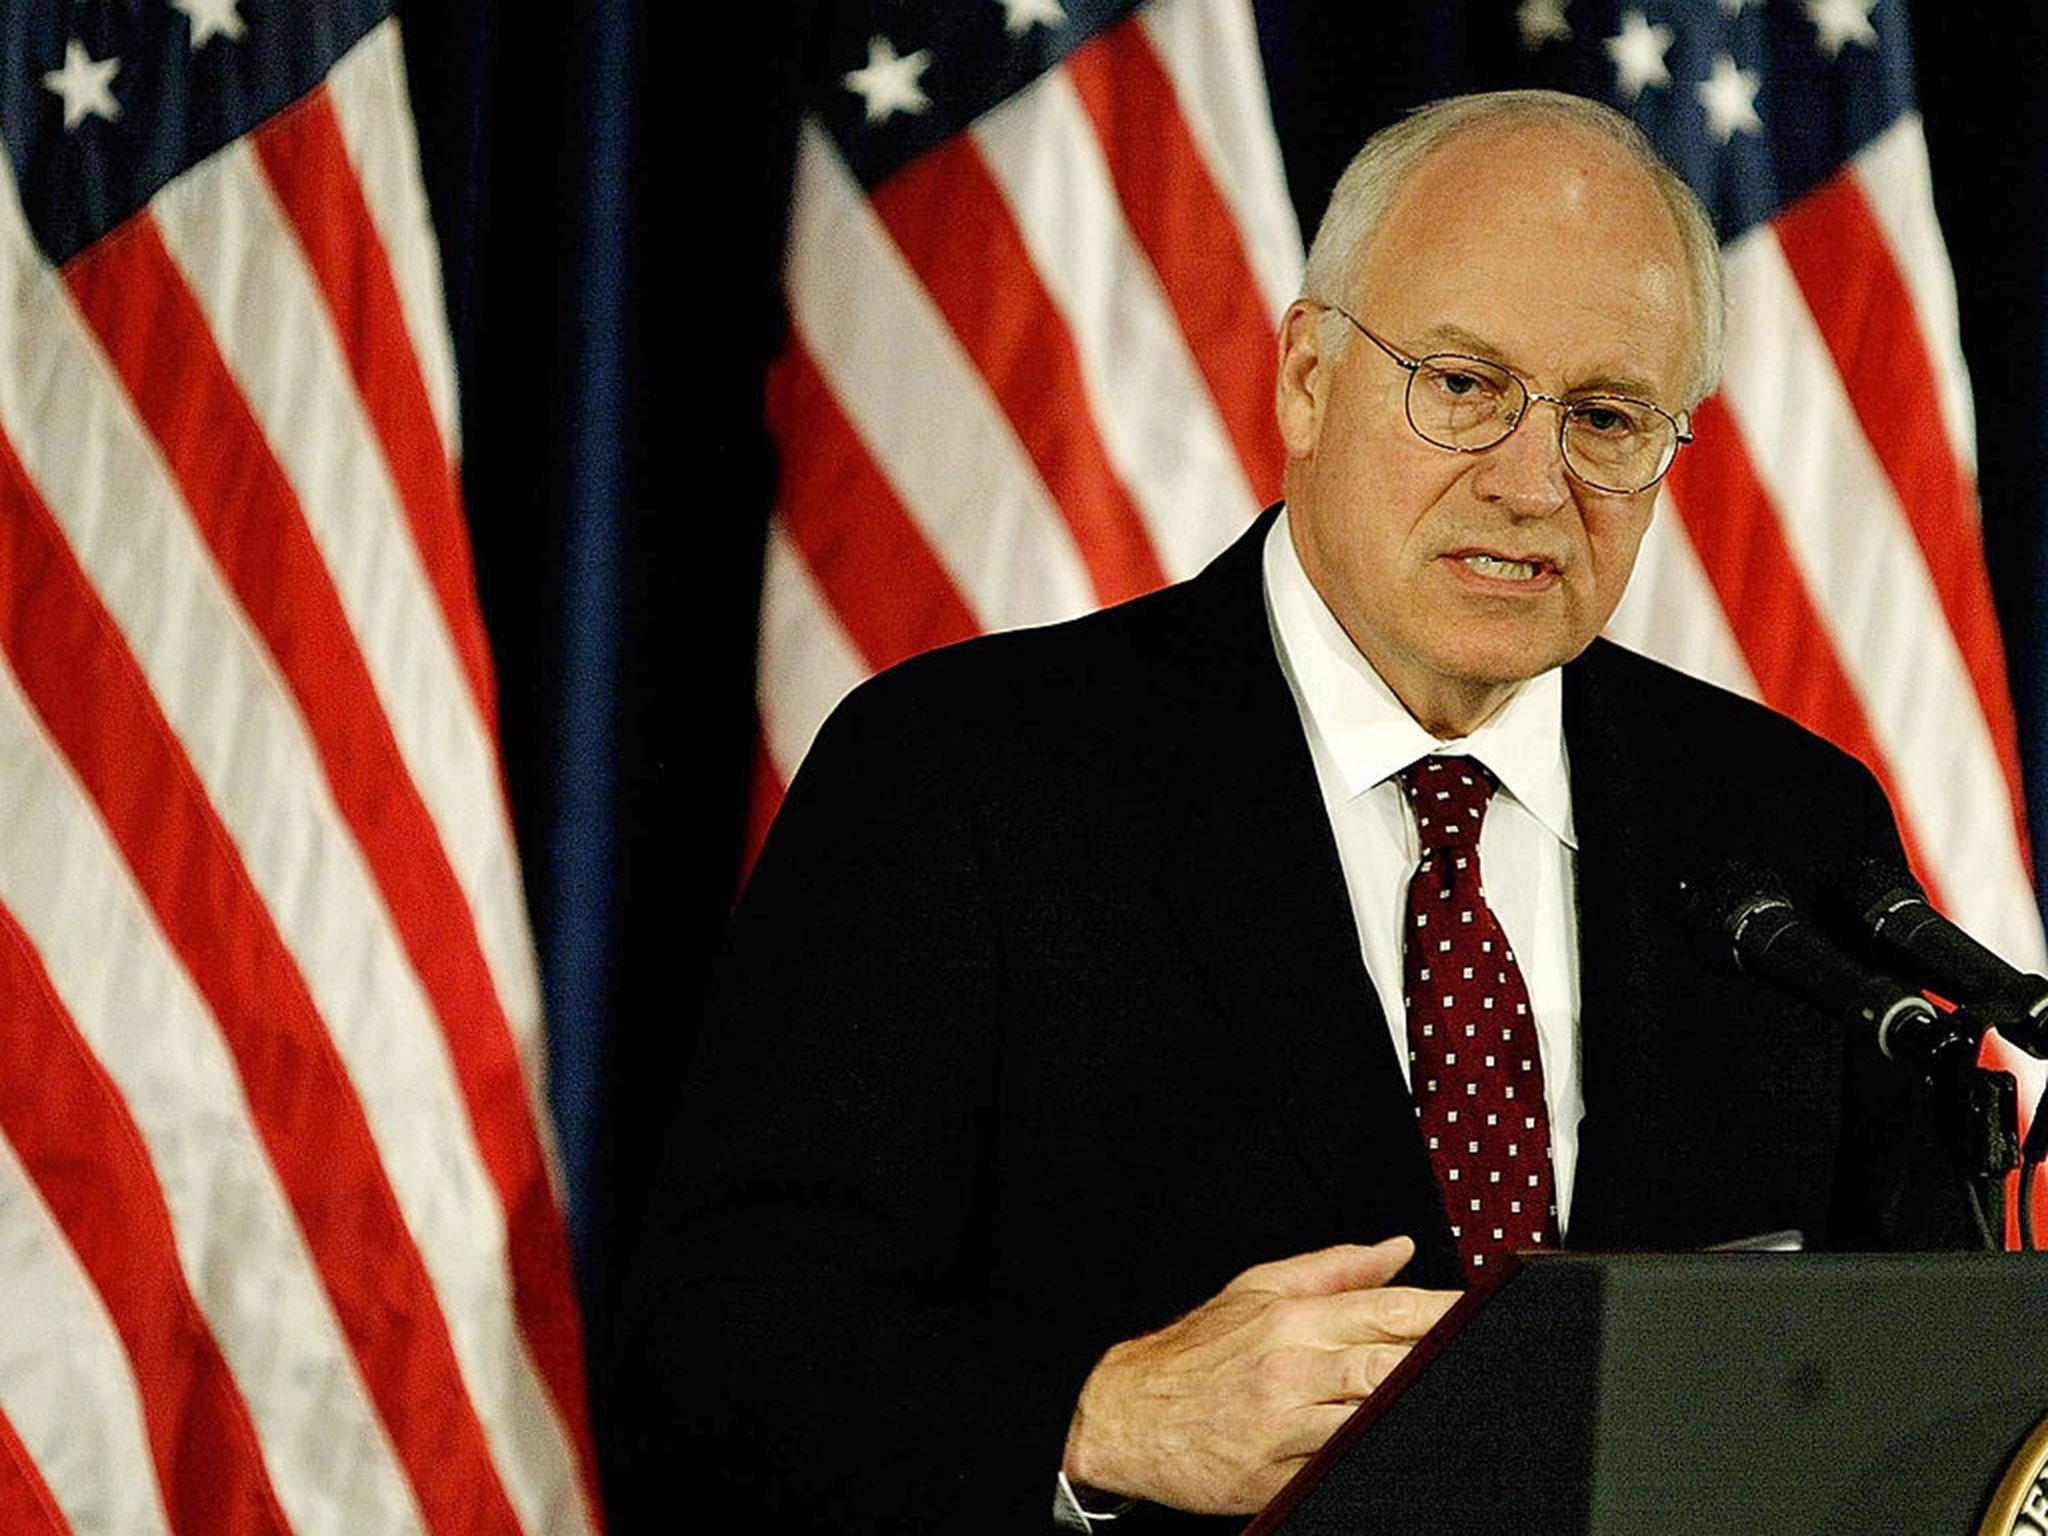 October 2003: Dick Cheney speaks about terrorism and defends the Iraq invasion